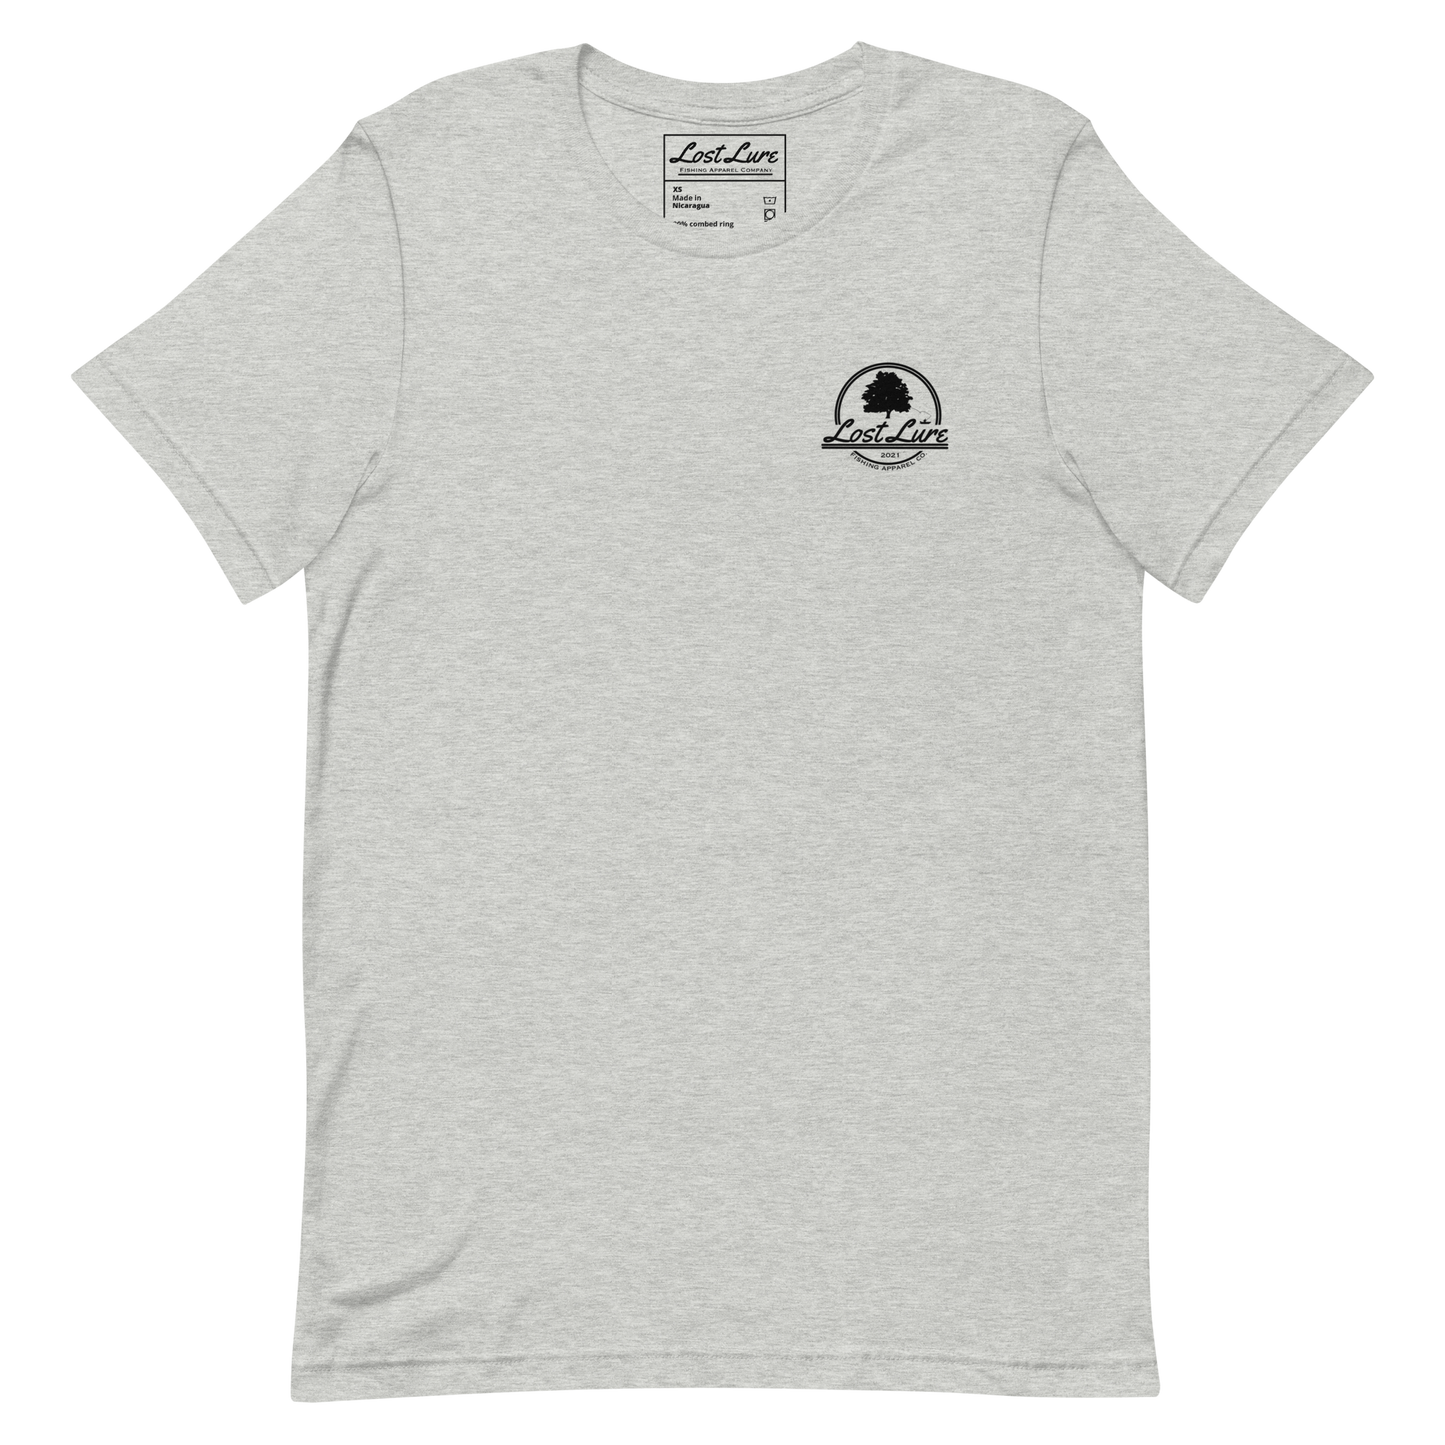 Cutthroat Trout fishing shirt. It’s an American traditional style design with a cutthroat trout and a dagger. The shirt reads Cutthroat trout, est. 2021, lost lure fishing apparel company. The front of the shirt has the lost lure logo. Grey fishing shirt, front side